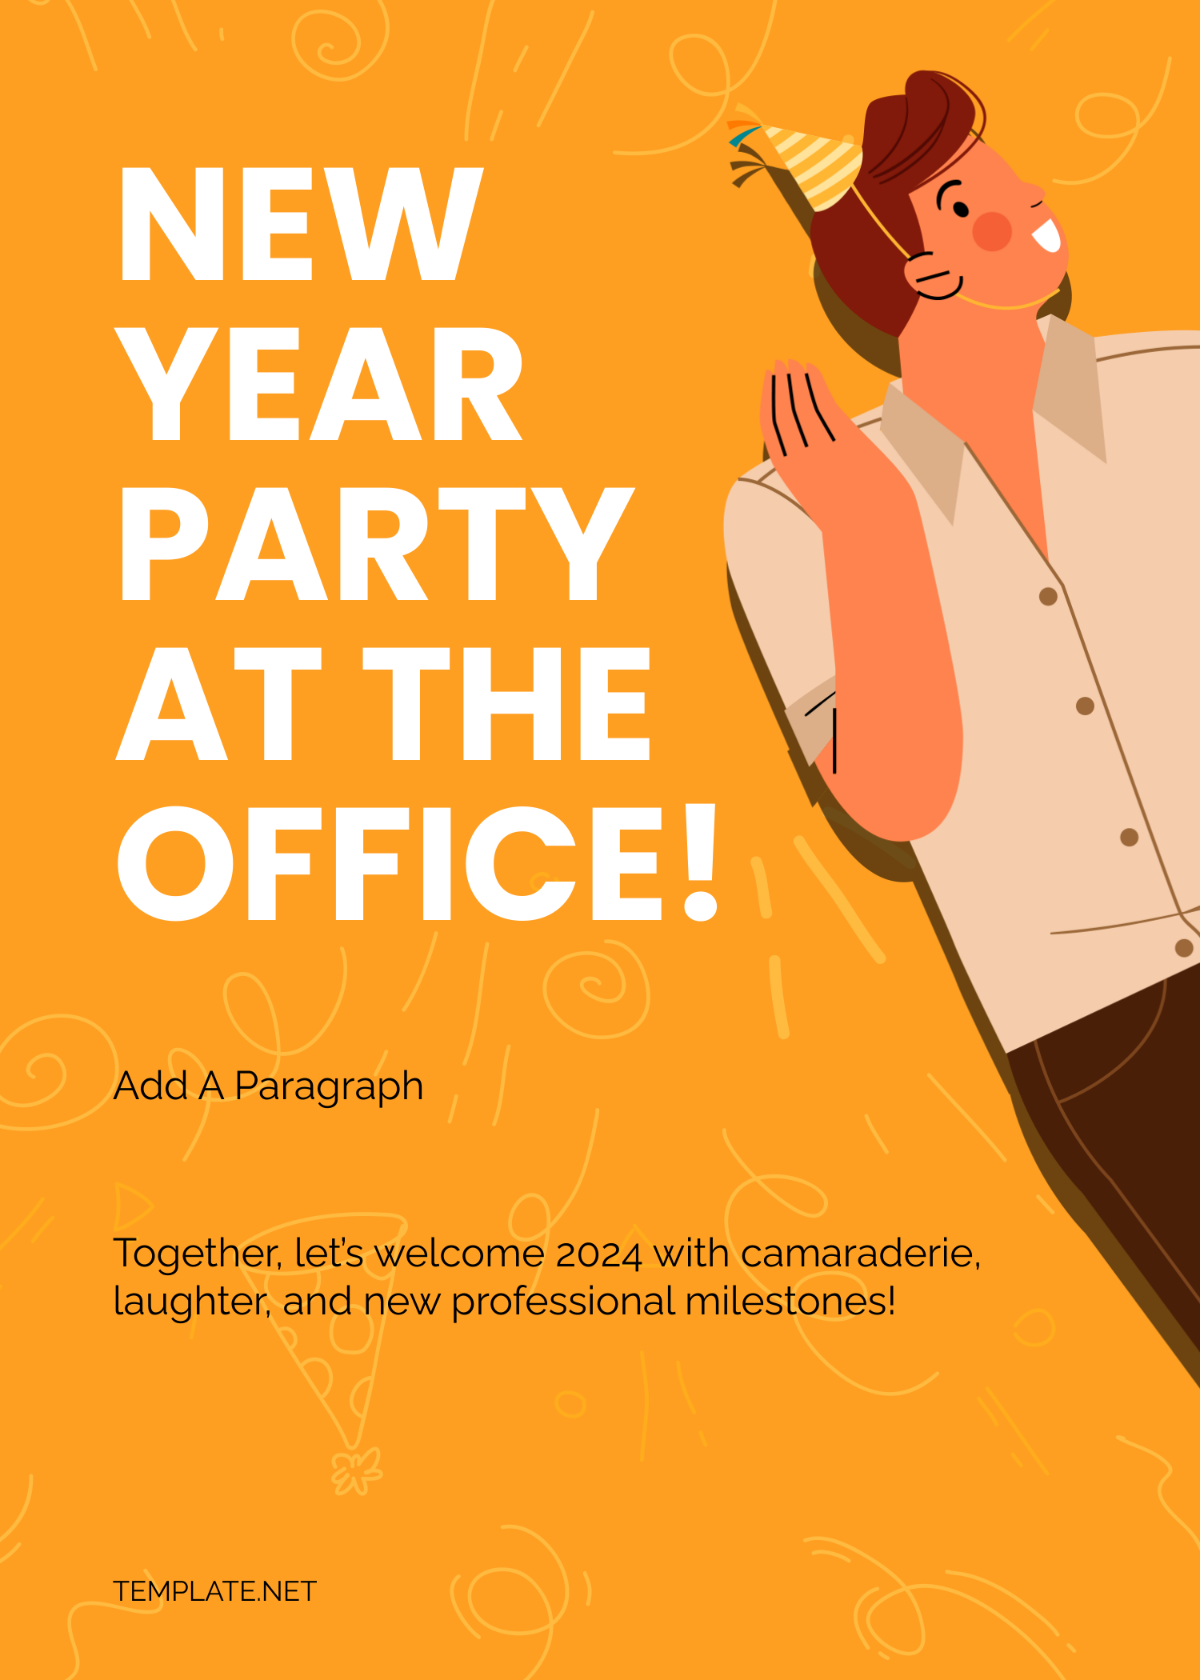 Free New Year Invitation for Employees Template